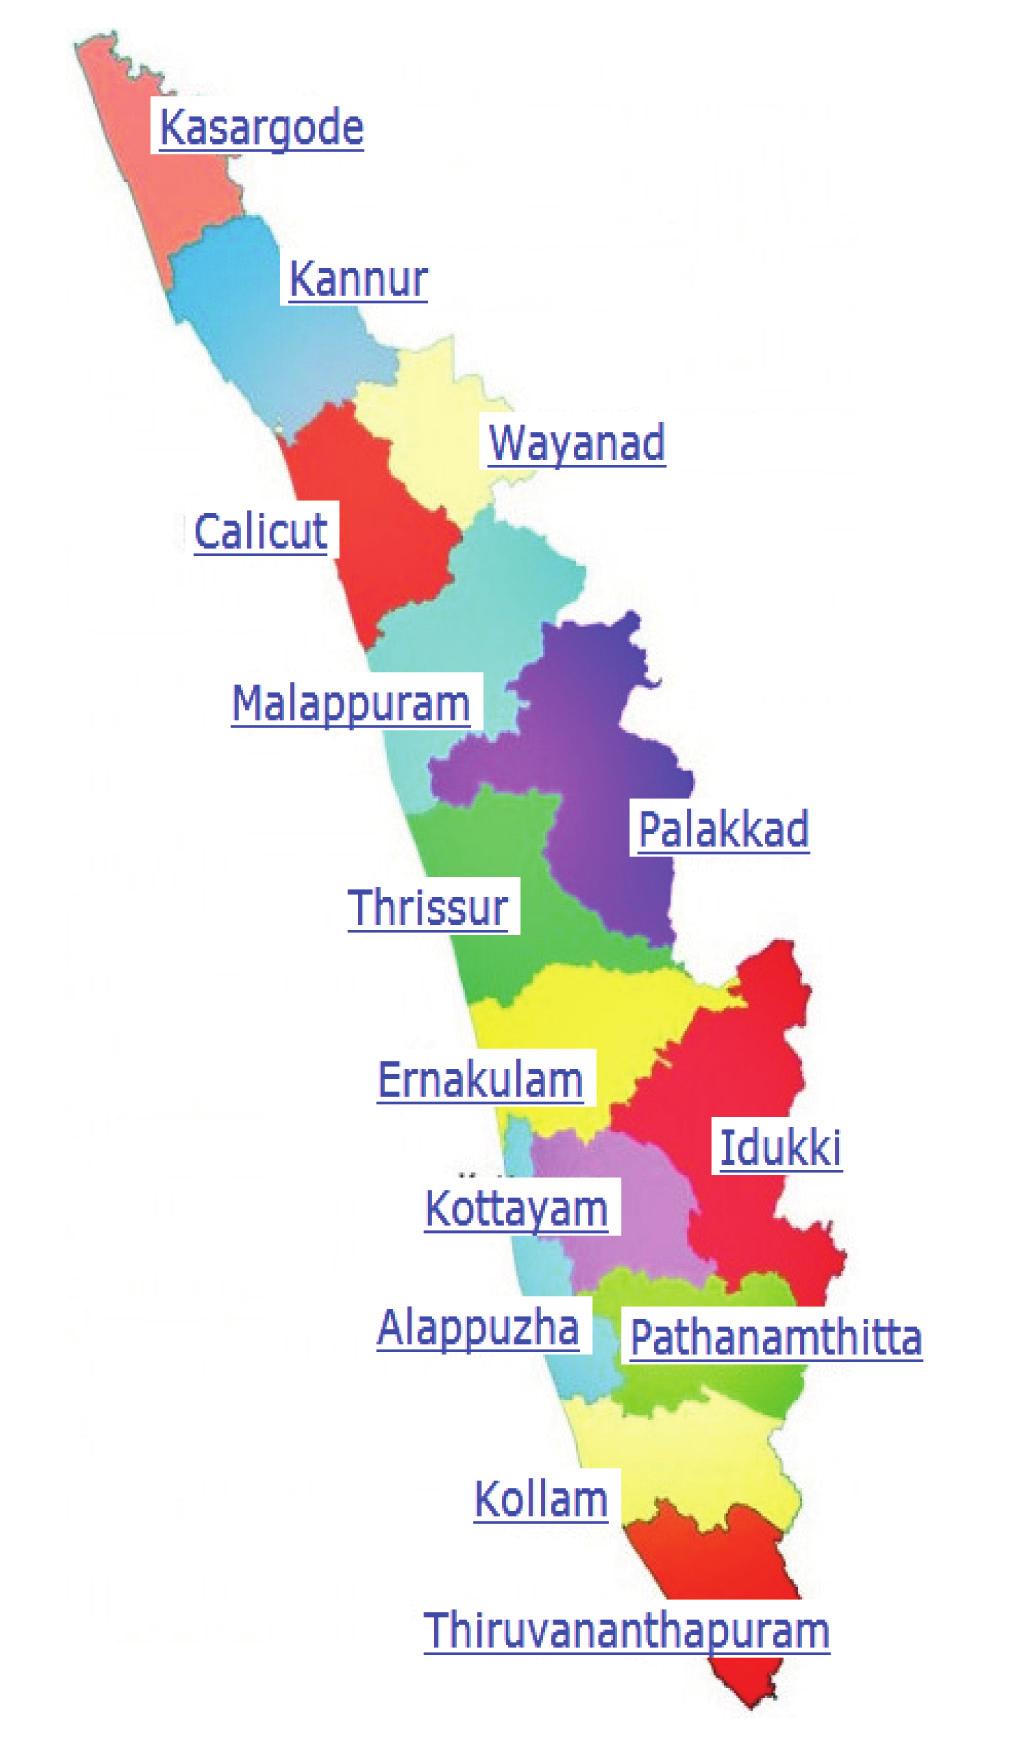 The system is designed for all the districts of Kerala with reference to the maximum reference crop evapotranspiration (ET 0 ) of the area, established by Vardan (1997).